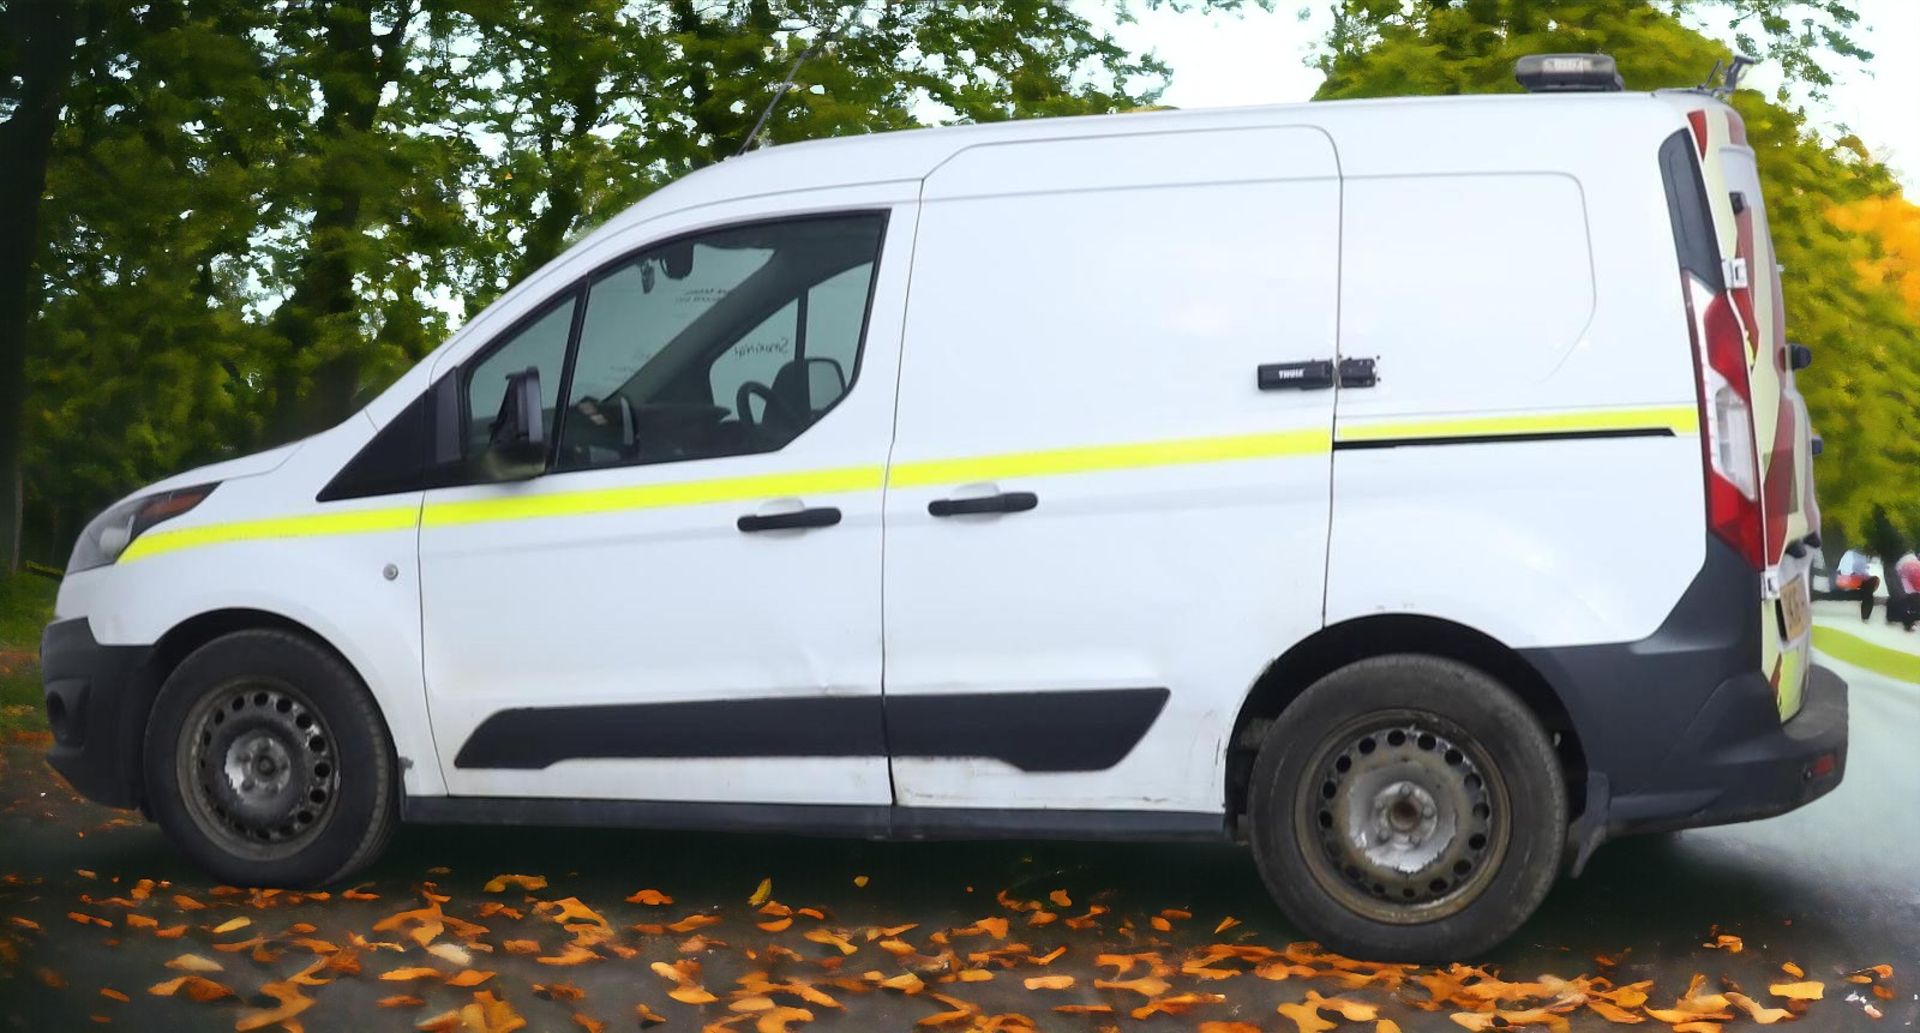 FORD TRANSIT CONNECT ECONETIC SWB PANEL VAN: COMPACT AND EFFICIENT WORKHORSE - Image 6 of 12